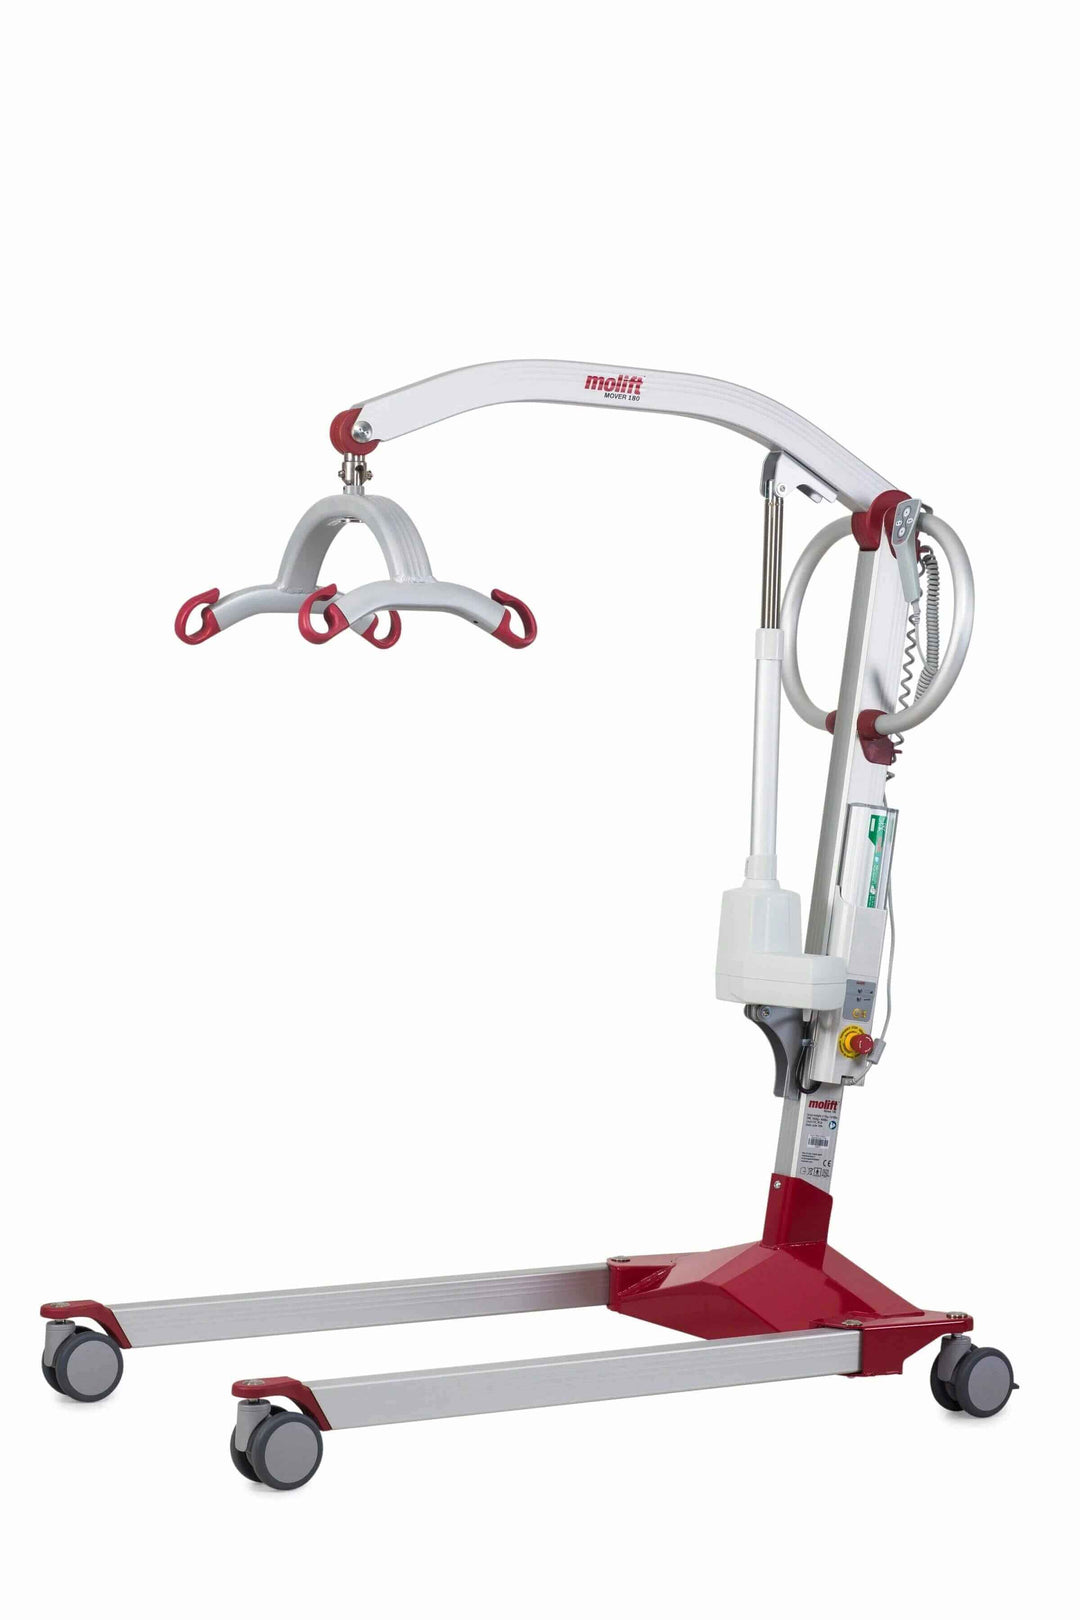 Molift - Weight Scale for Air, Mover and Nomad Patient Lifts (Sling Bar not included) - shown with a molift patient lift